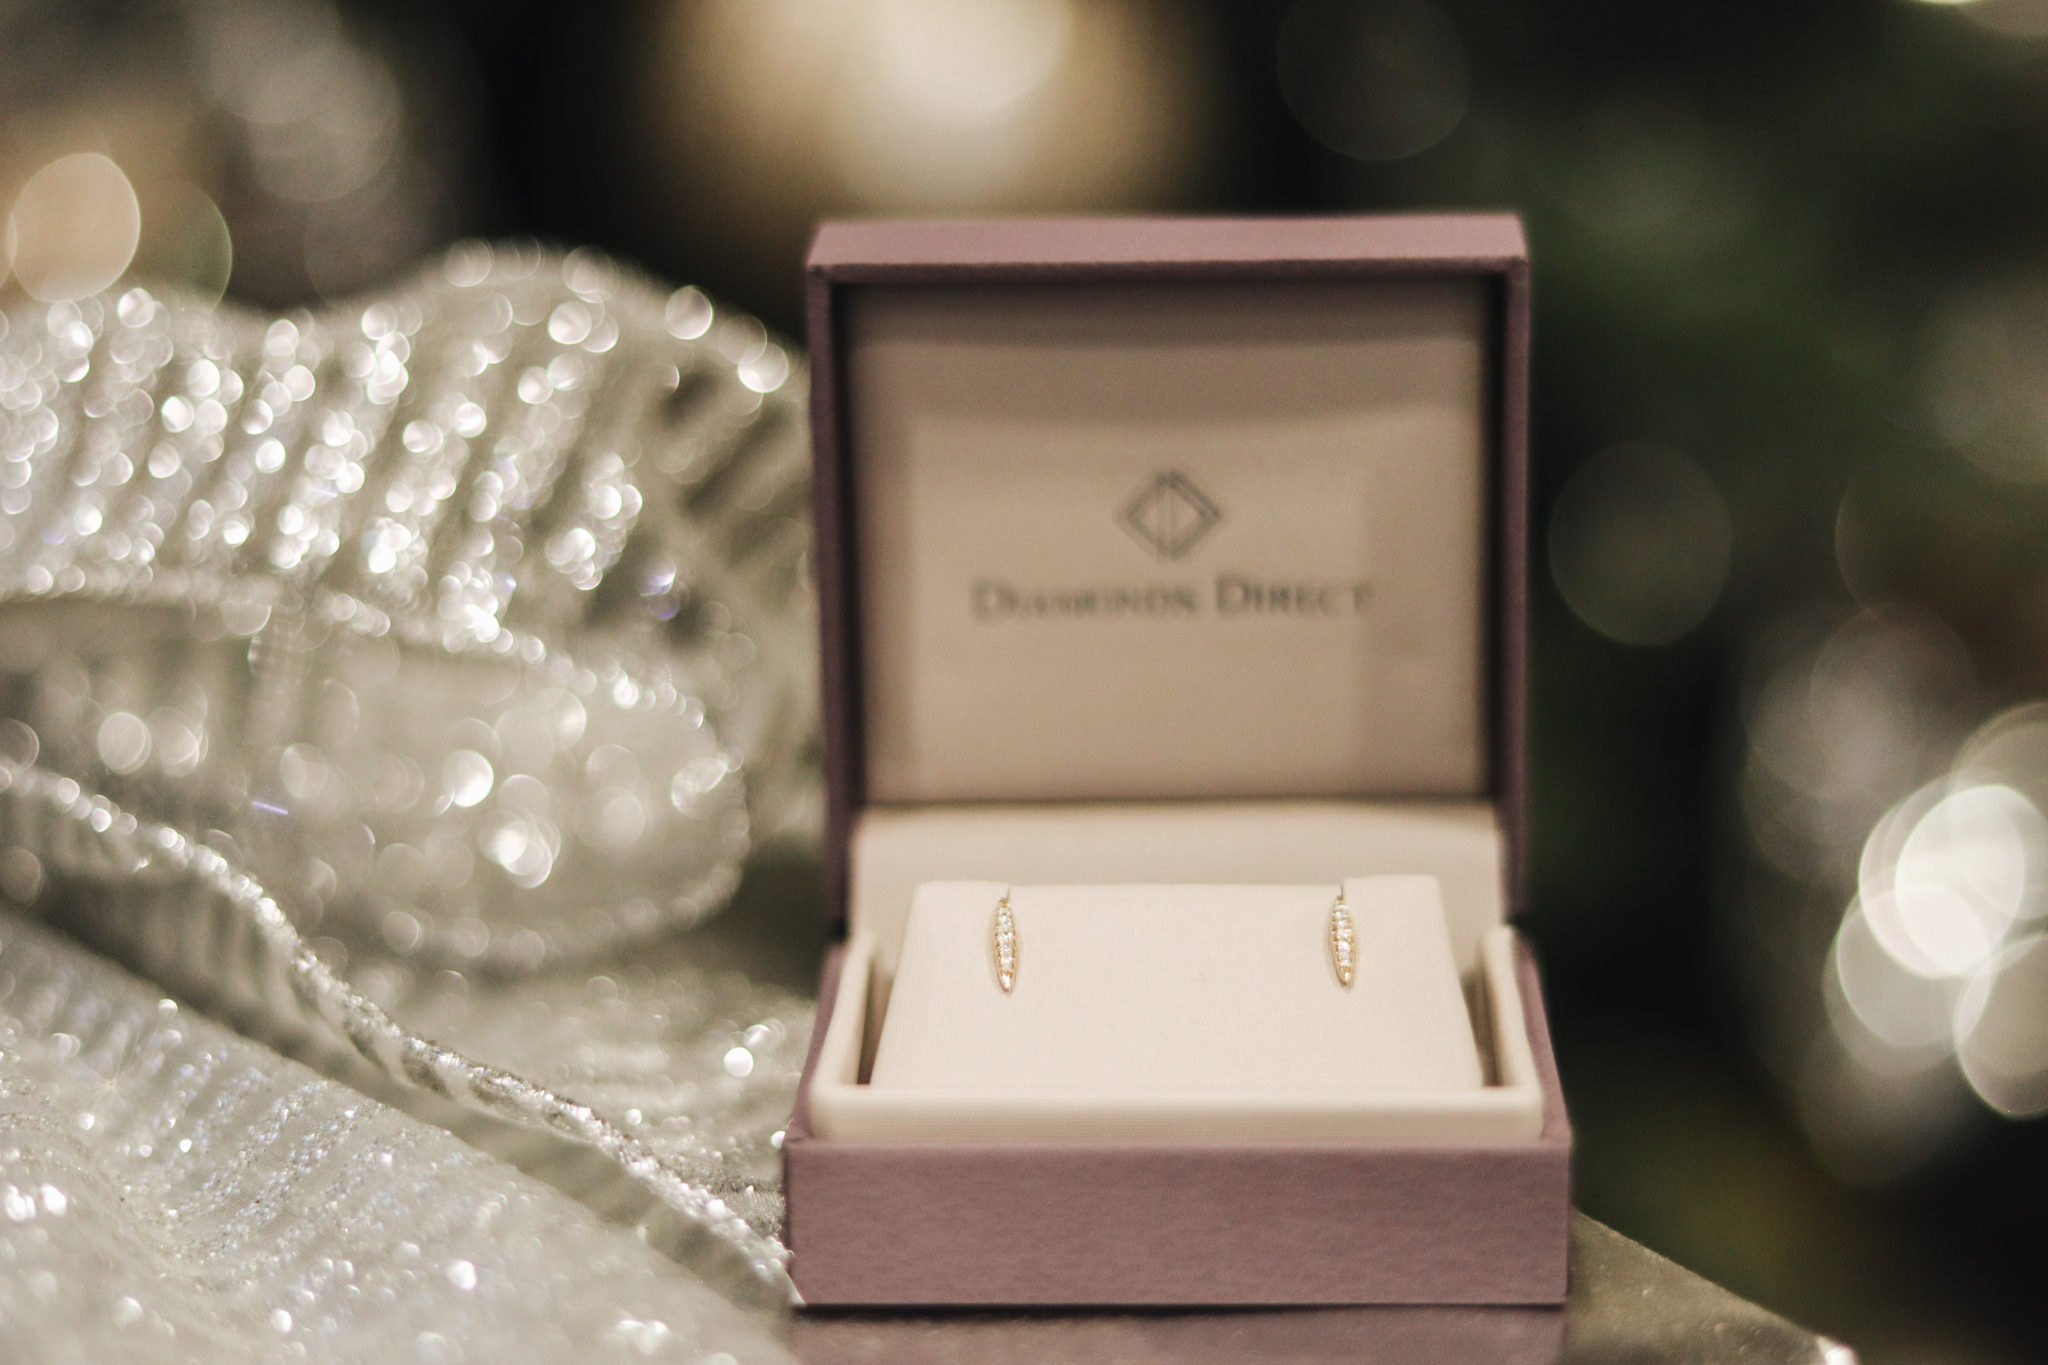 Diamonds Direct 01 7 gifts to buy at the Diamonds Direct earring event in Birmingham, from $232-$2025